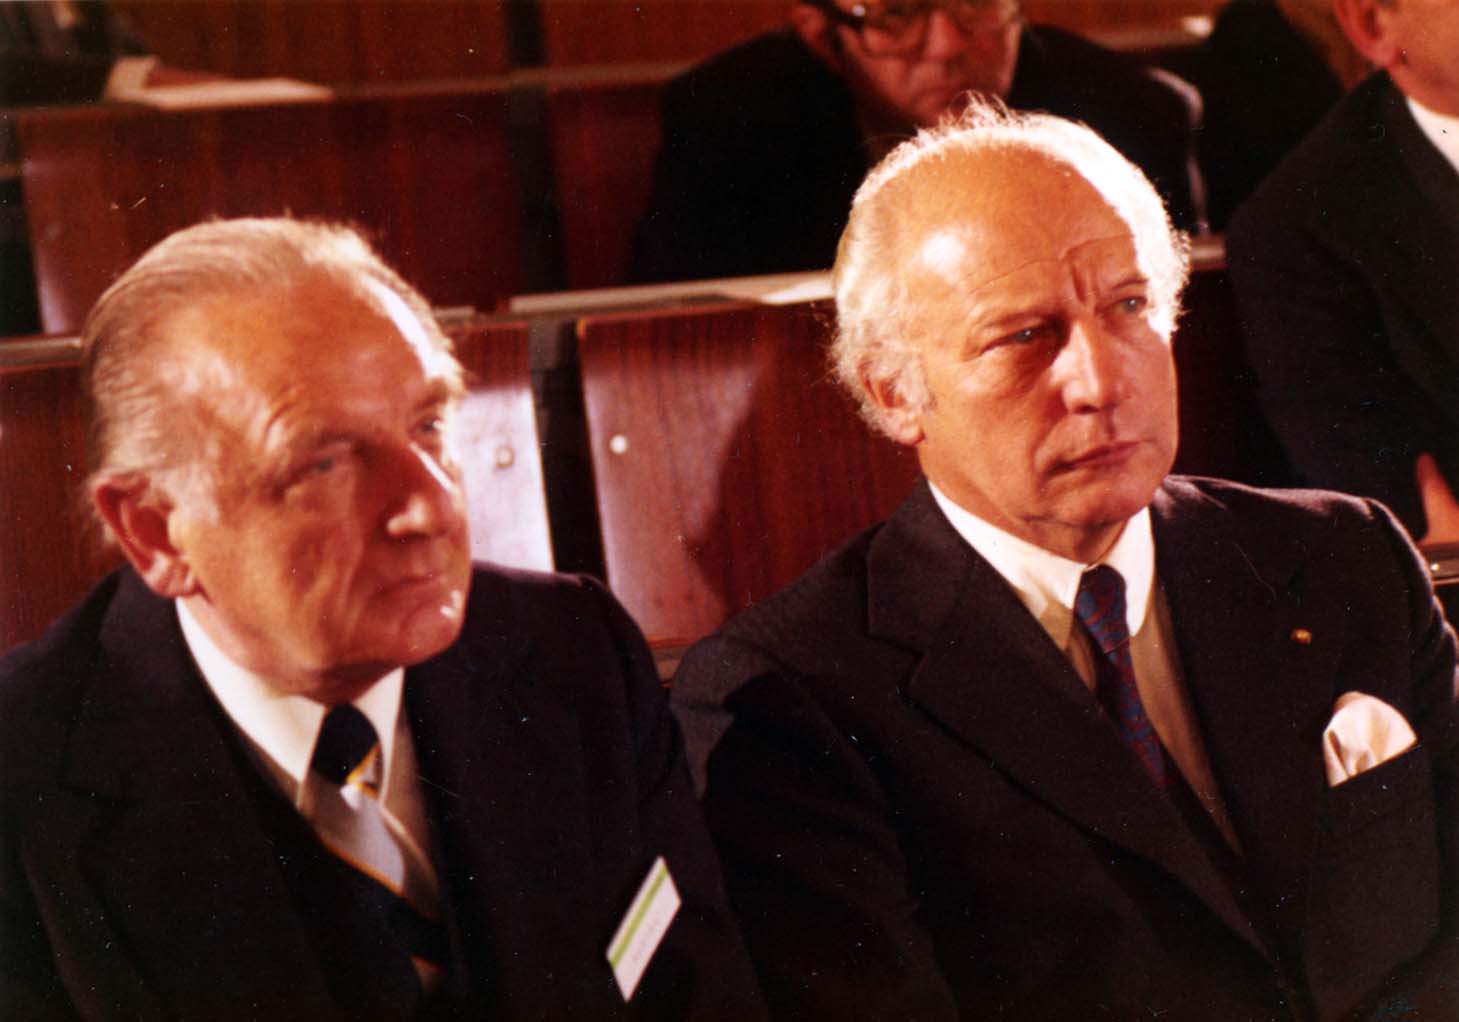 Fraunhofer Annual Conference 1977 - Federal President Scheel (right)